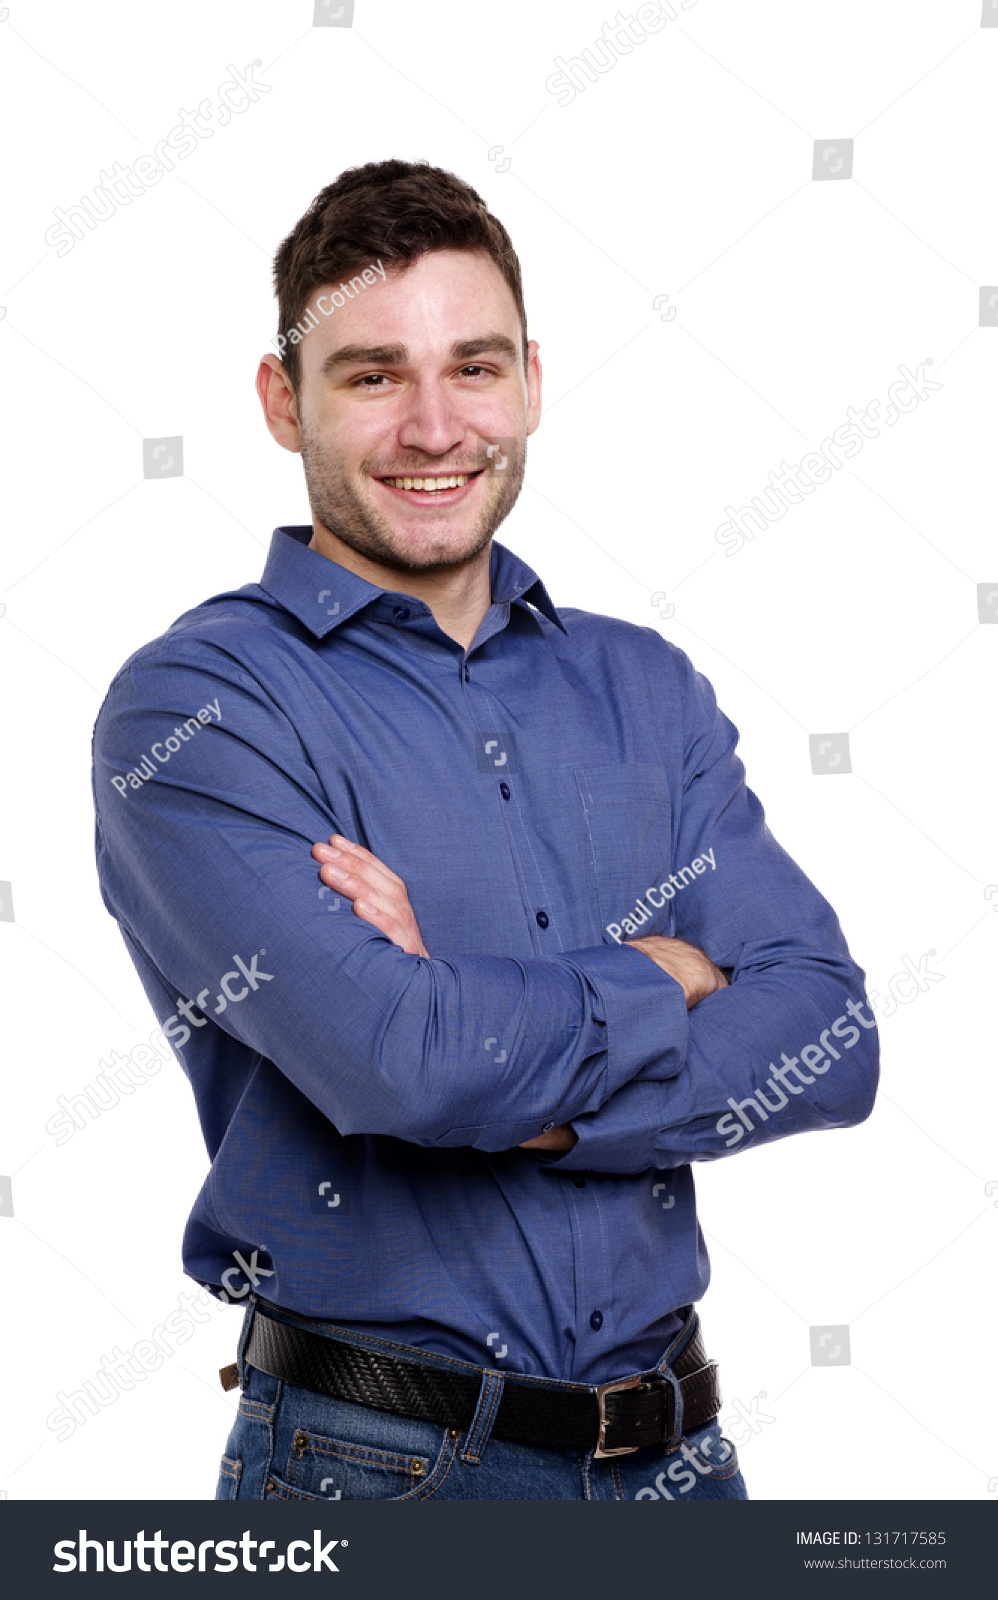 Handsome man wearing a blue shirt and jeans isolated on a white background #131717585